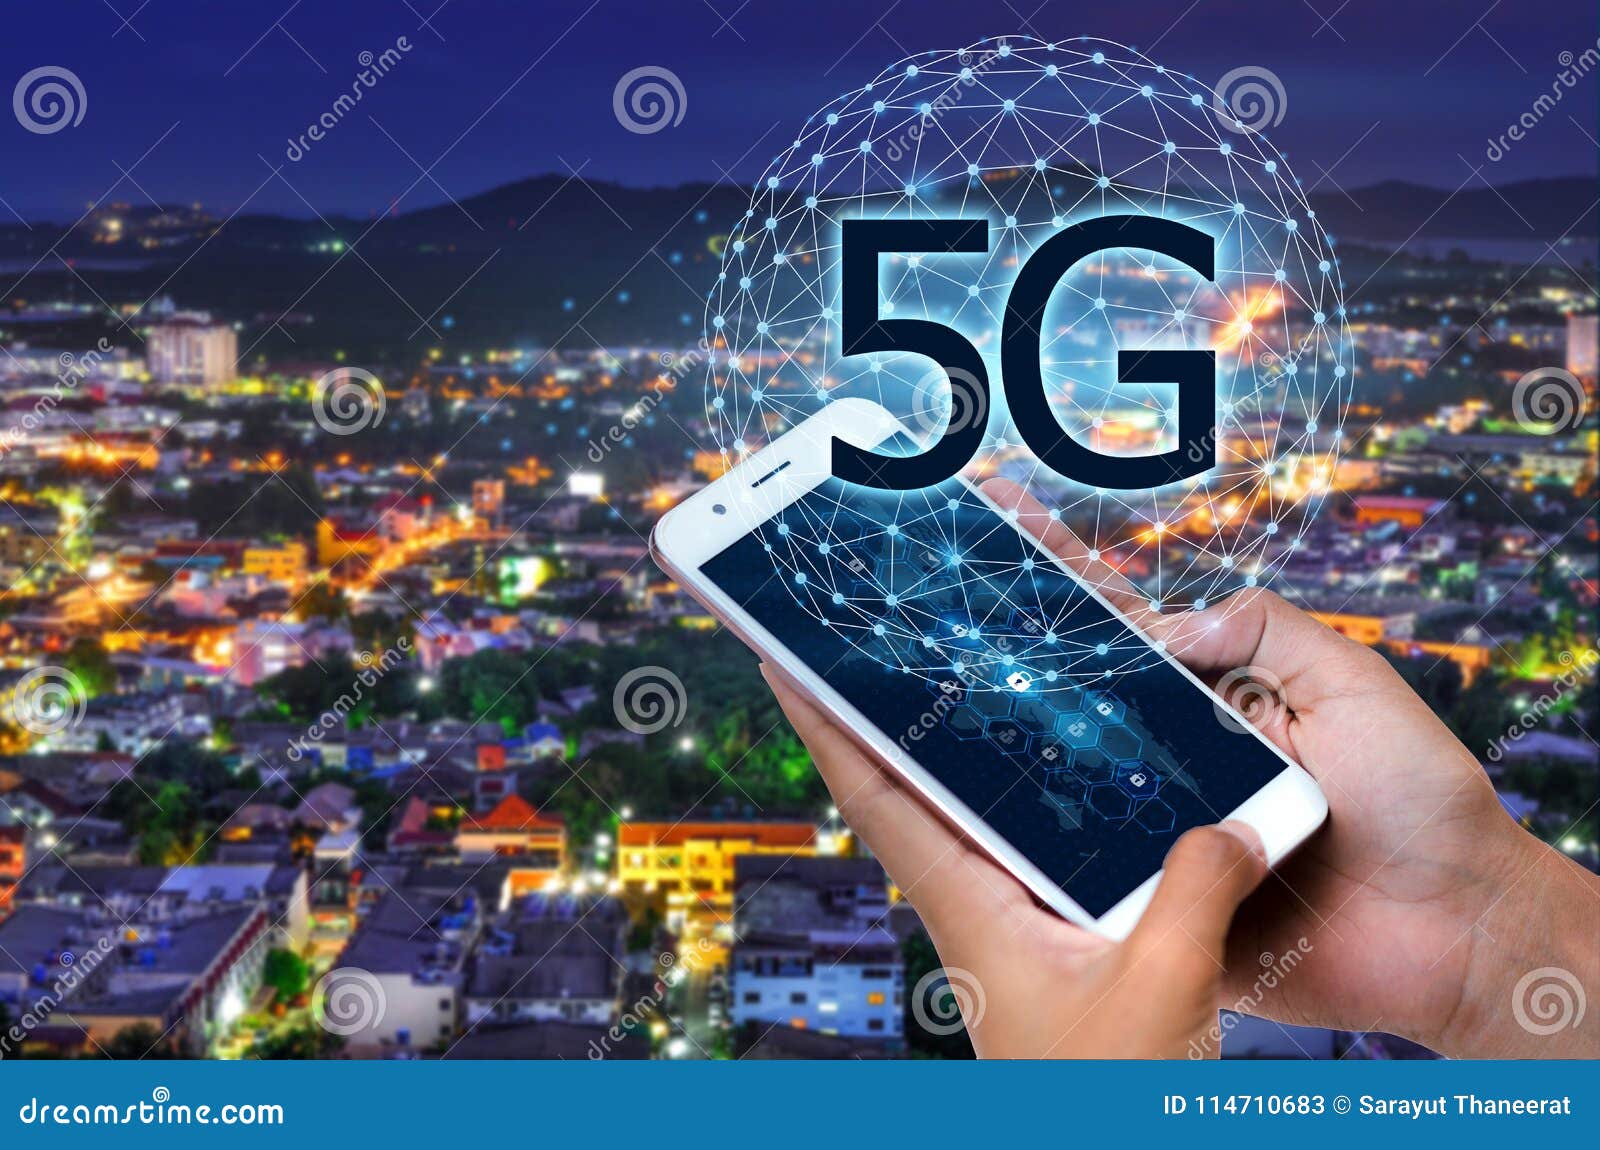 business people use global communication phones in the 5g system